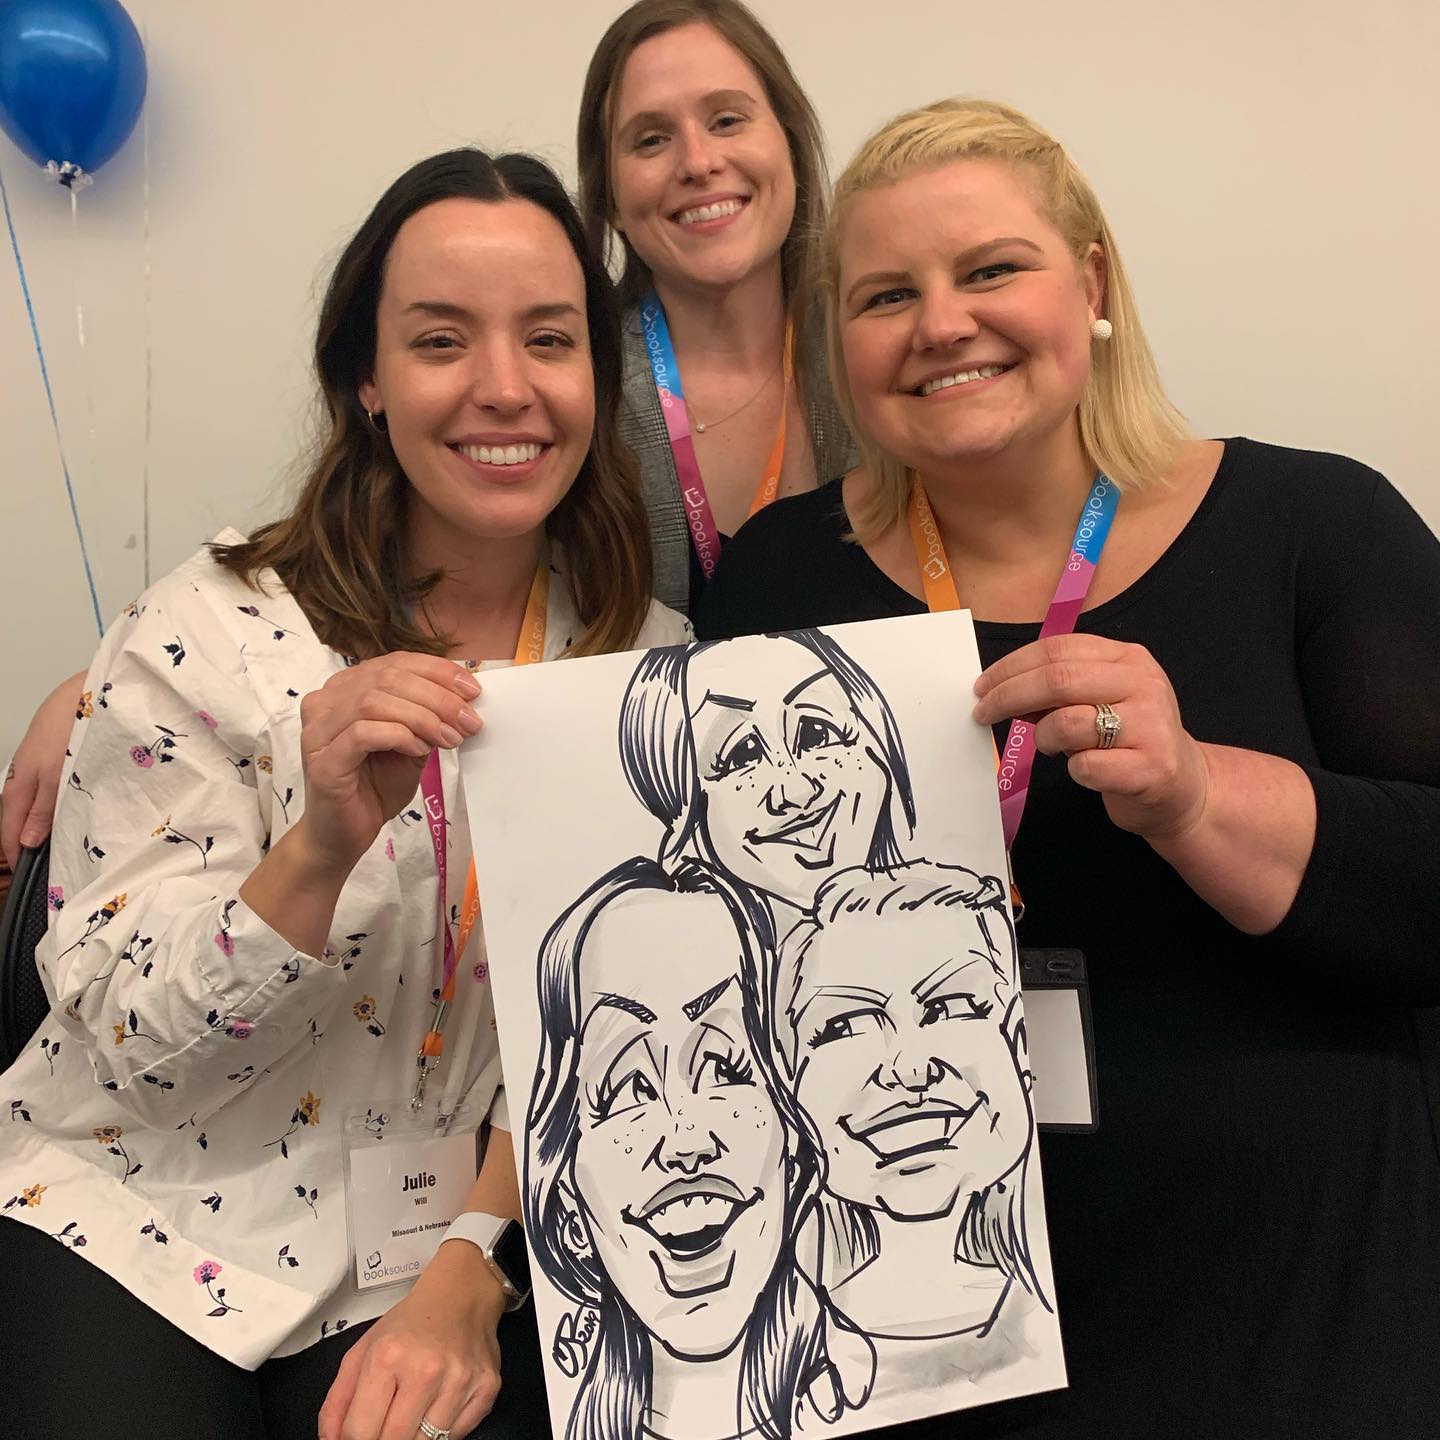 Three women smile as they hold their new caricature